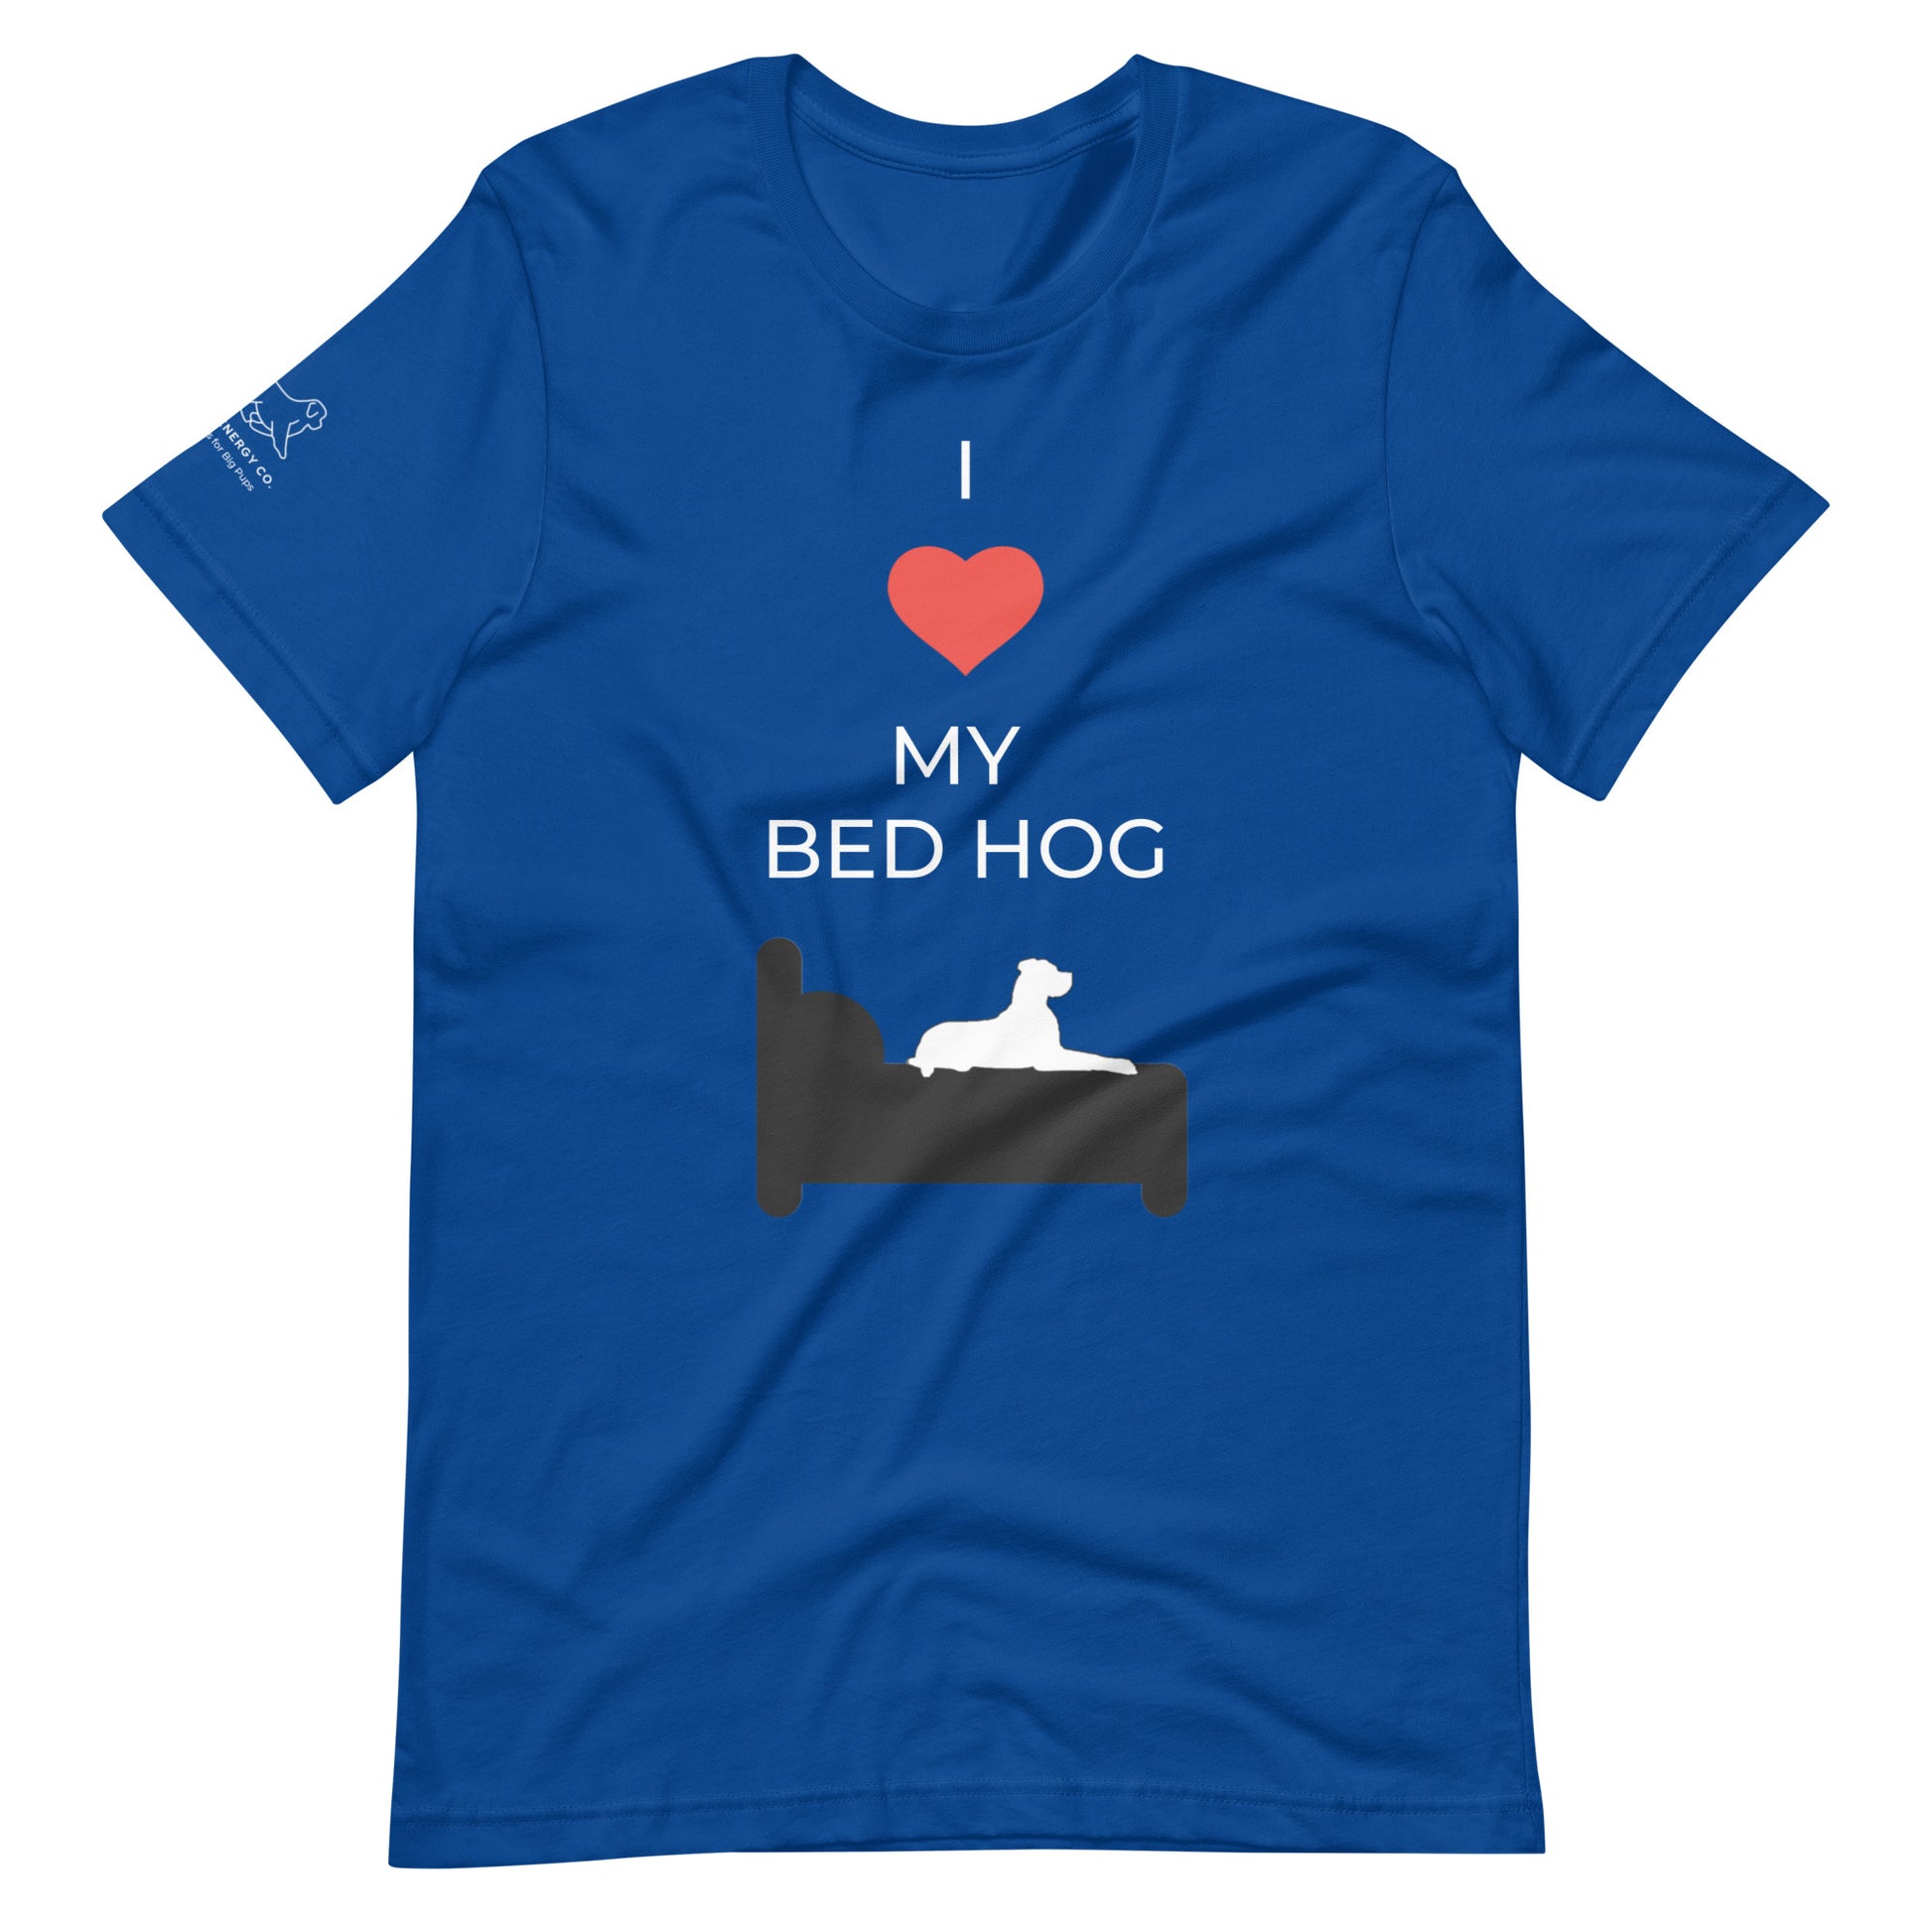 Front of a true royal blue t-shirt that reads "I love my bed hog" in white text over an illustration that is the white silhouette of a large dog laying on the dark silhouette of a bed. The word "love" is replaced by a red heart symbol.